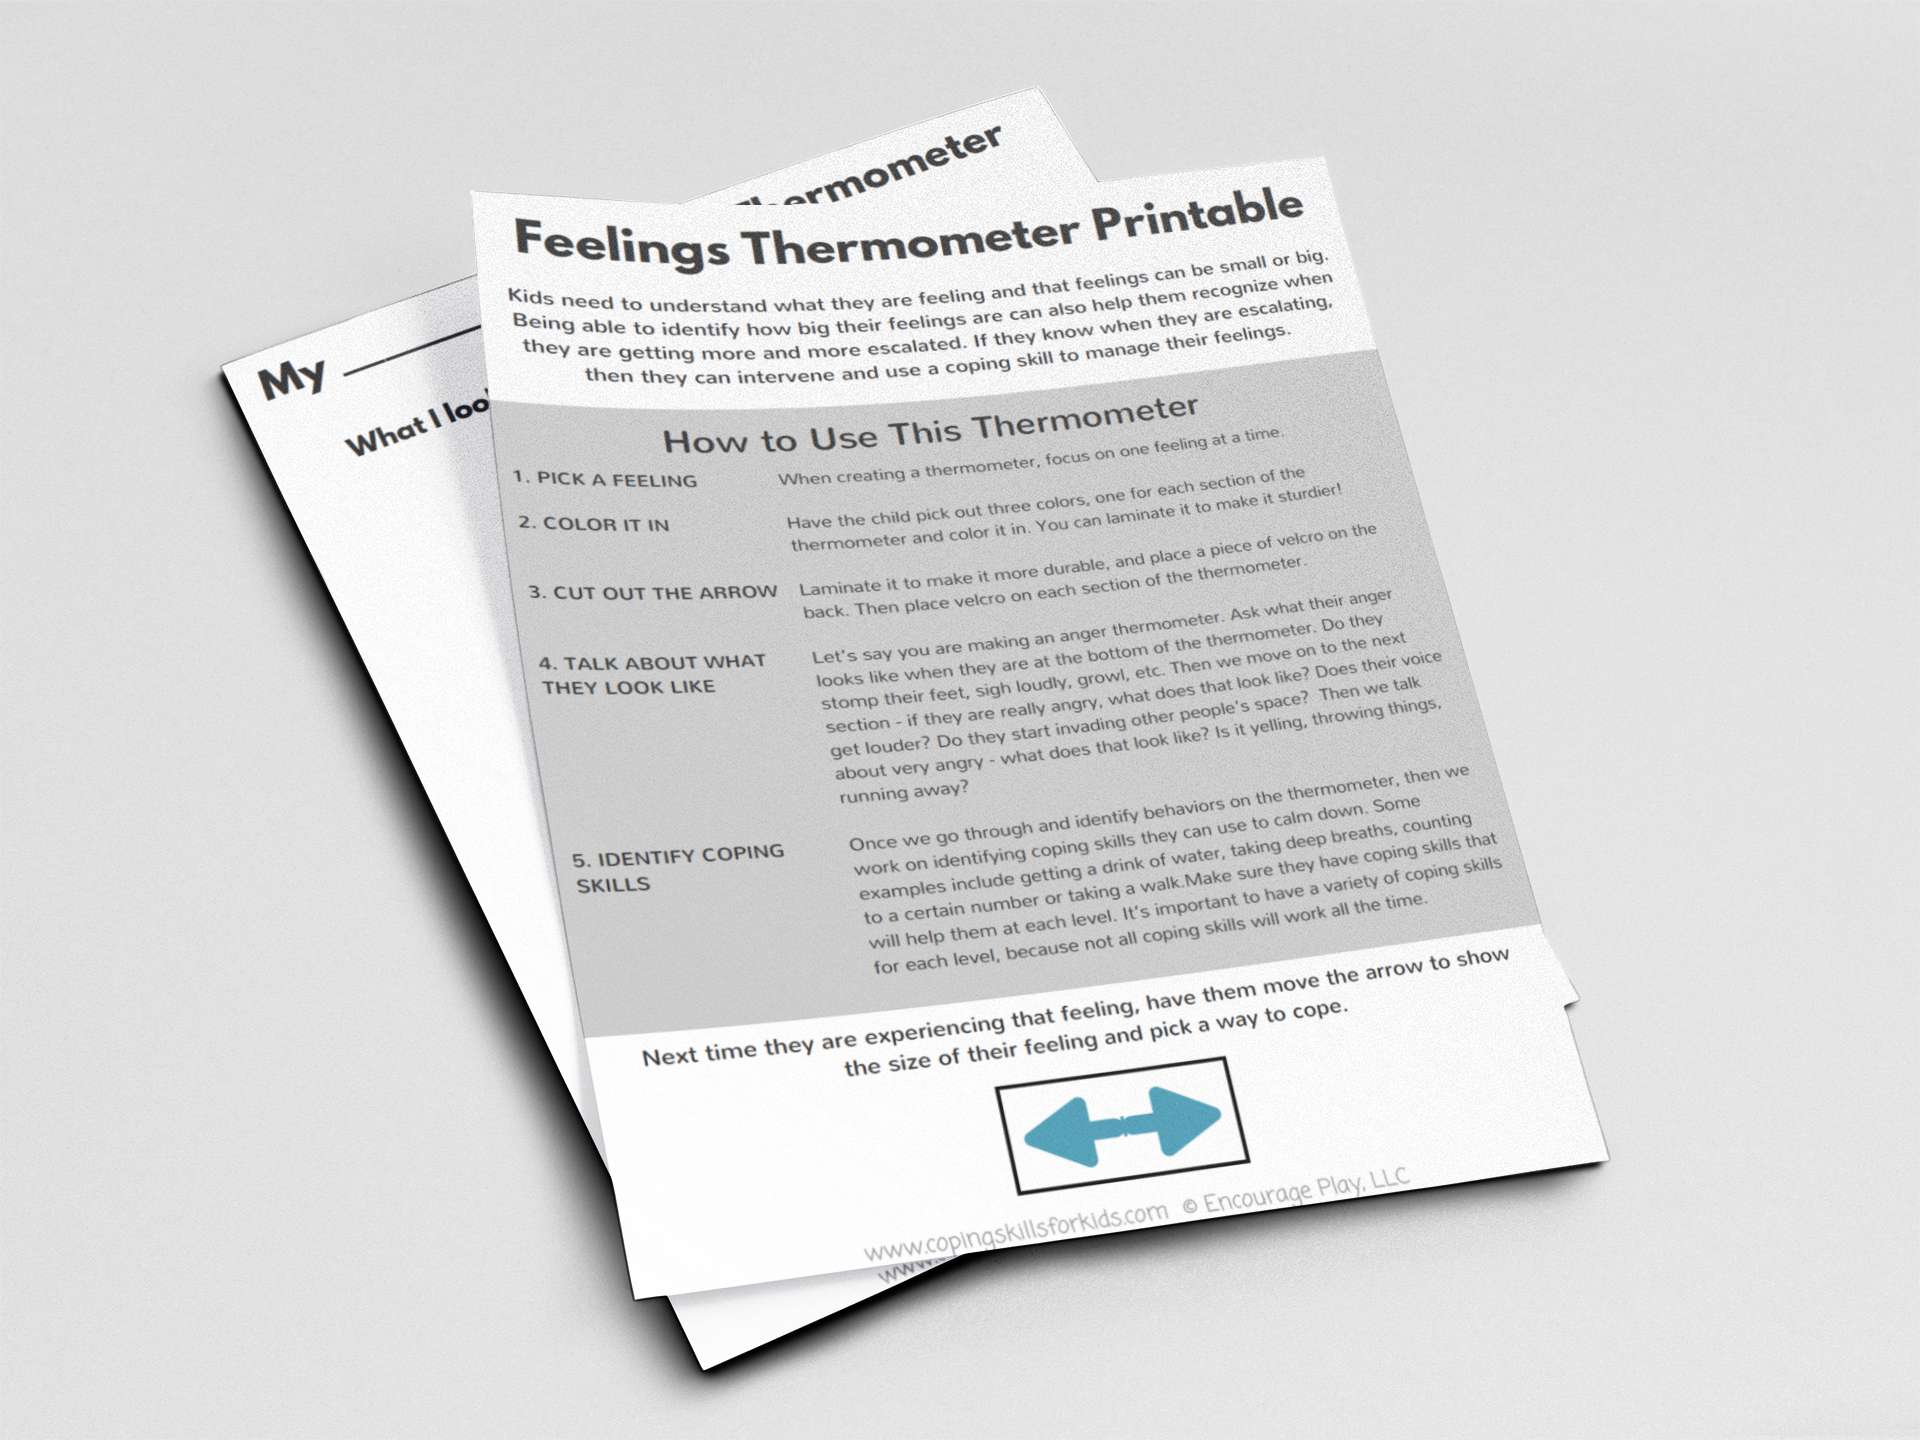 Feelings Thermometer